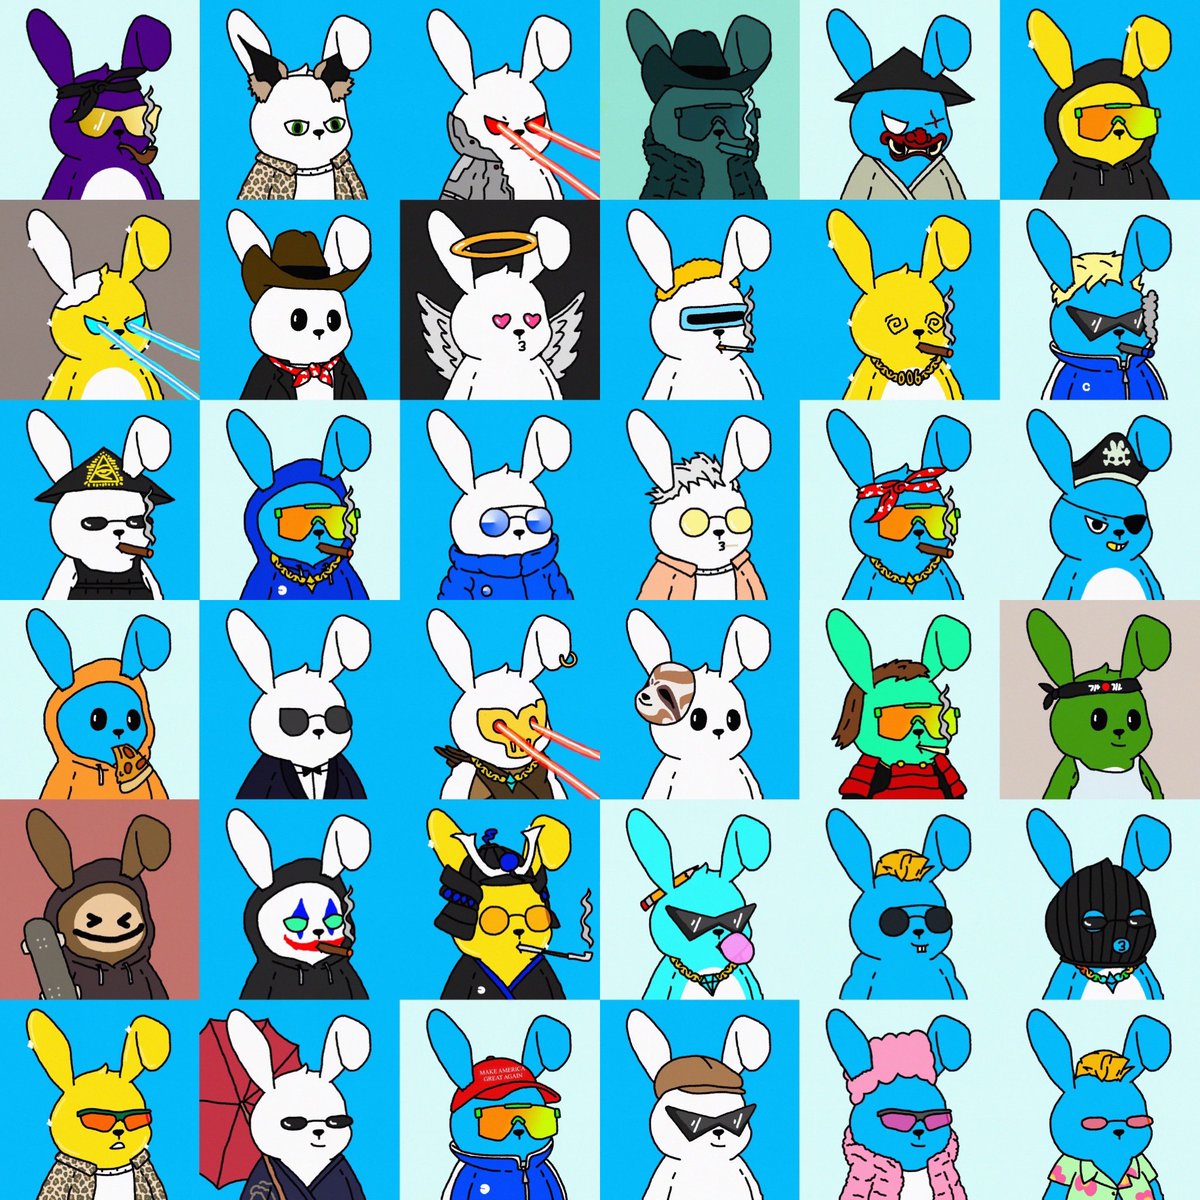 Over 40 1/1 Bunnies created for members of My FT club. Really loving the way this has all come together 🐰